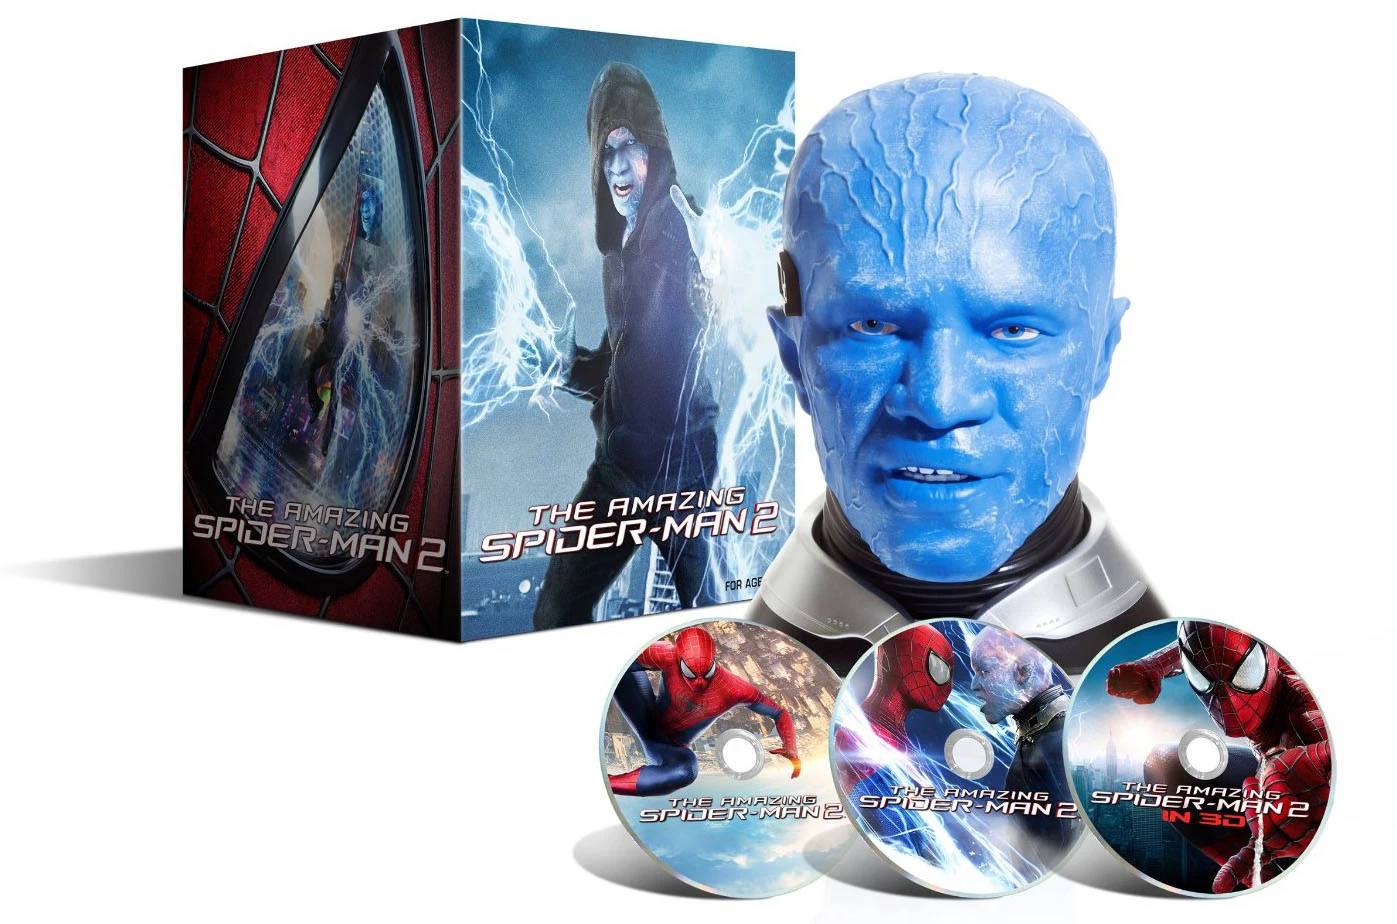 The Craziest DVD and Blu-ray Box Sets Ever